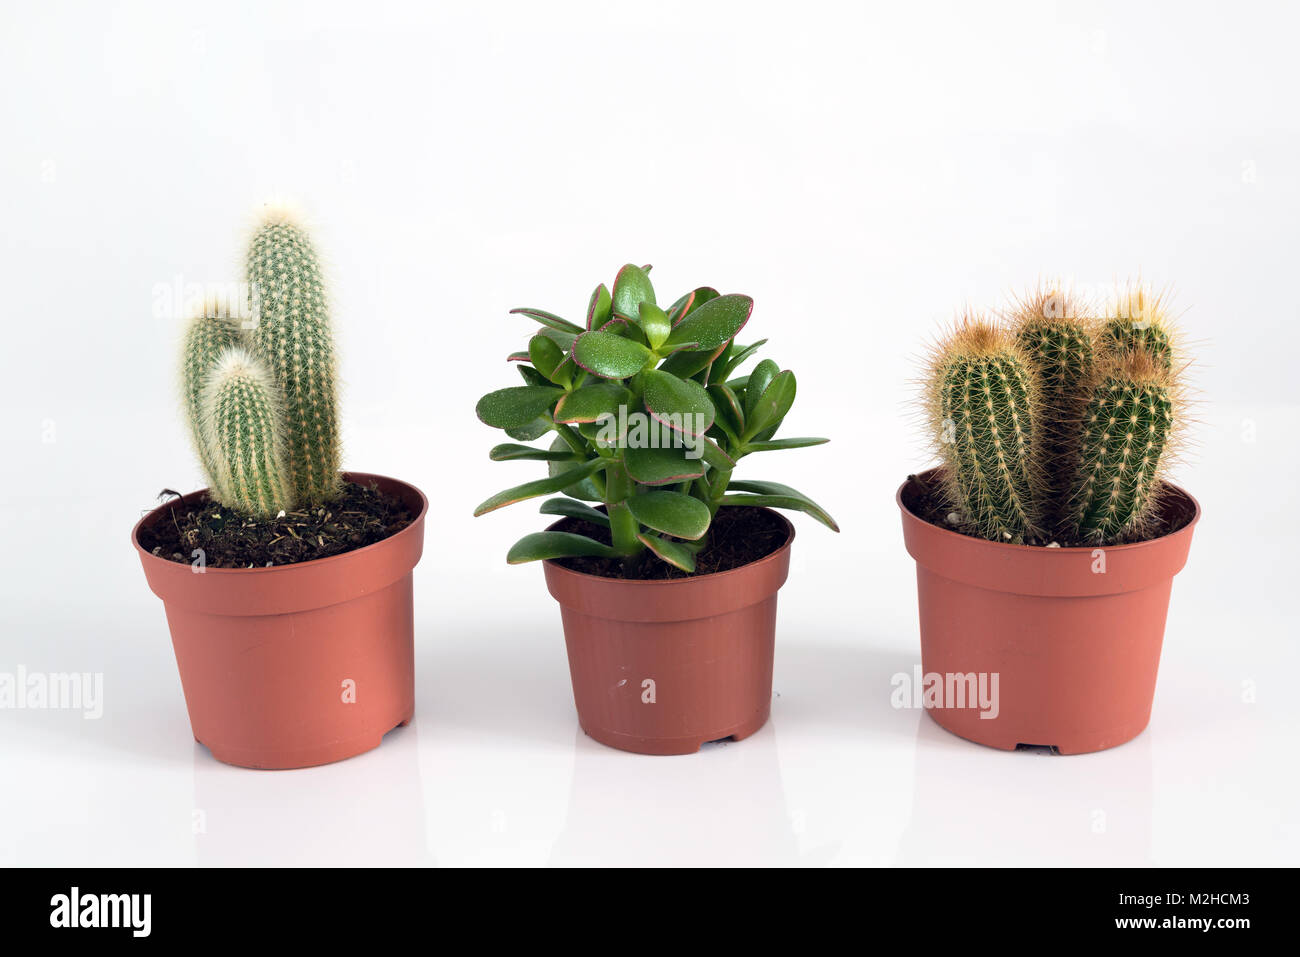 Crassula and Cactus in a pot on a white background. Stock Photo